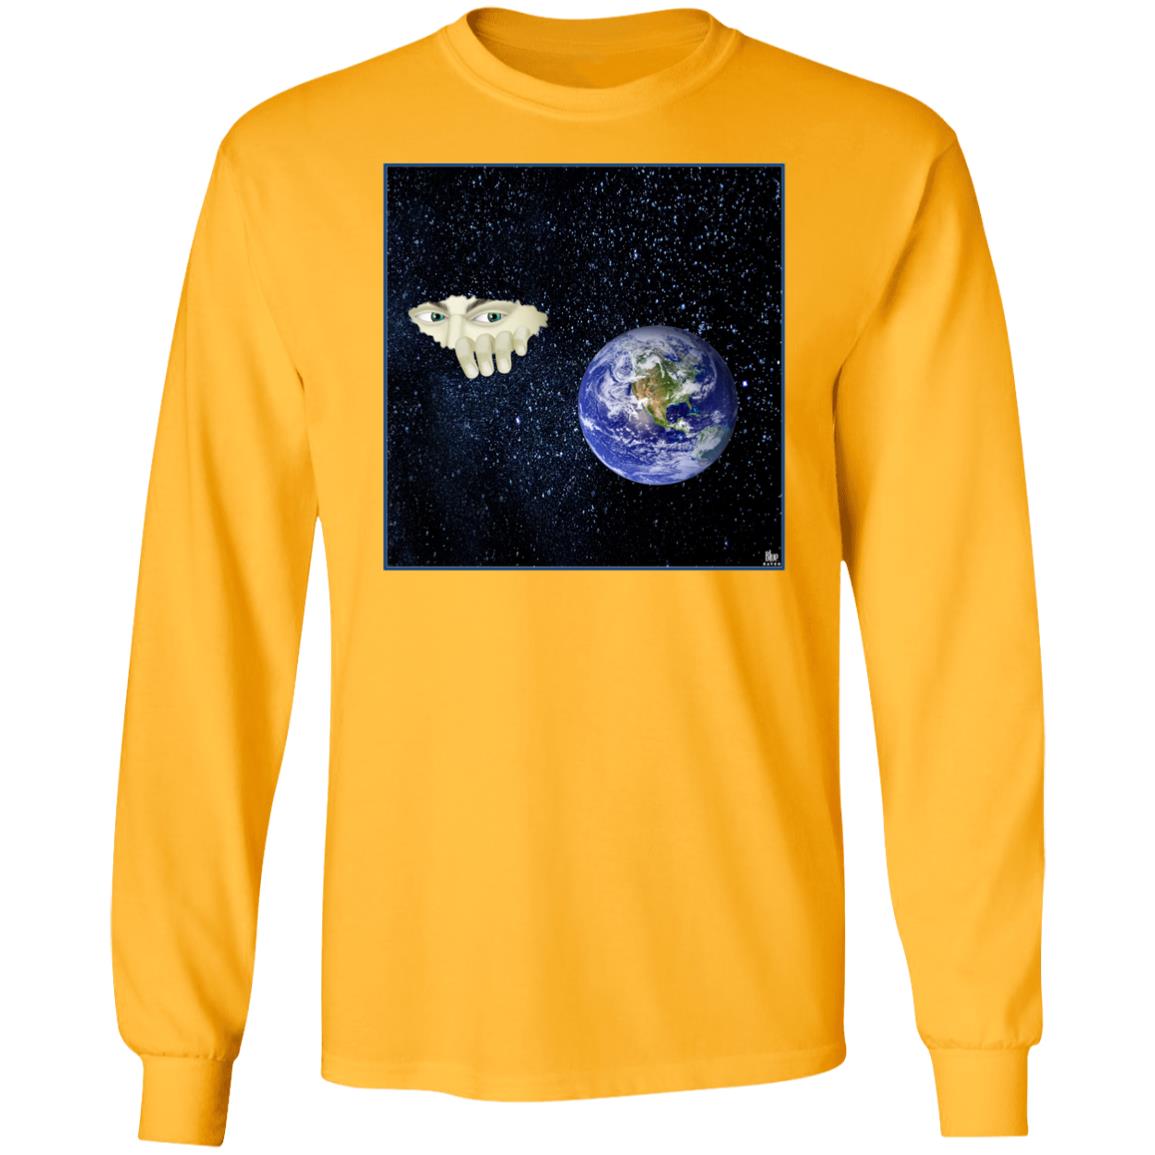 Somewhere Out There - Men's Long Sleeve T-Shirt